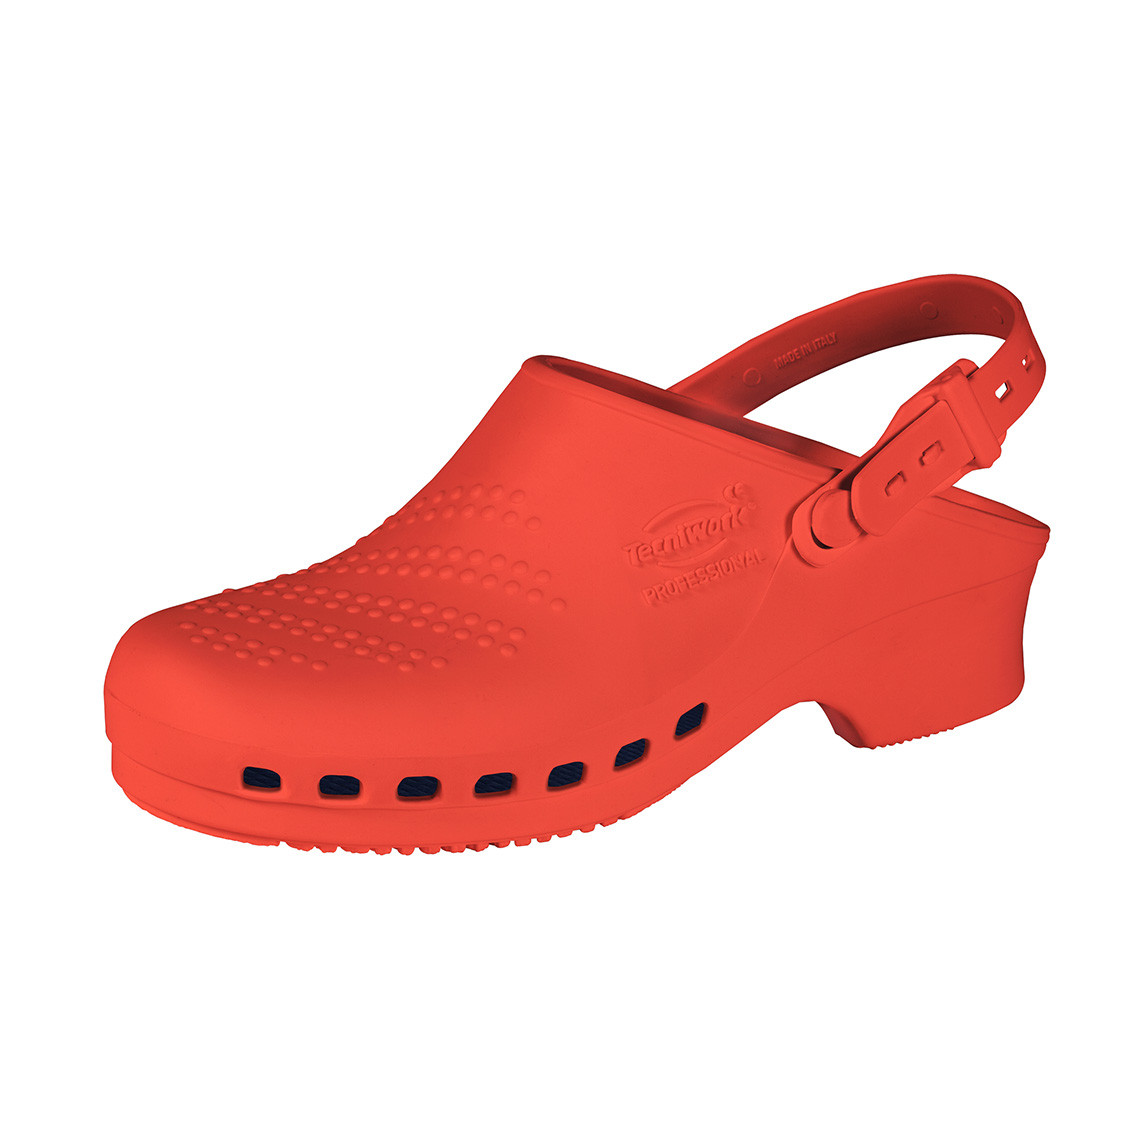 Professional sanitary clogs red Size 41/42